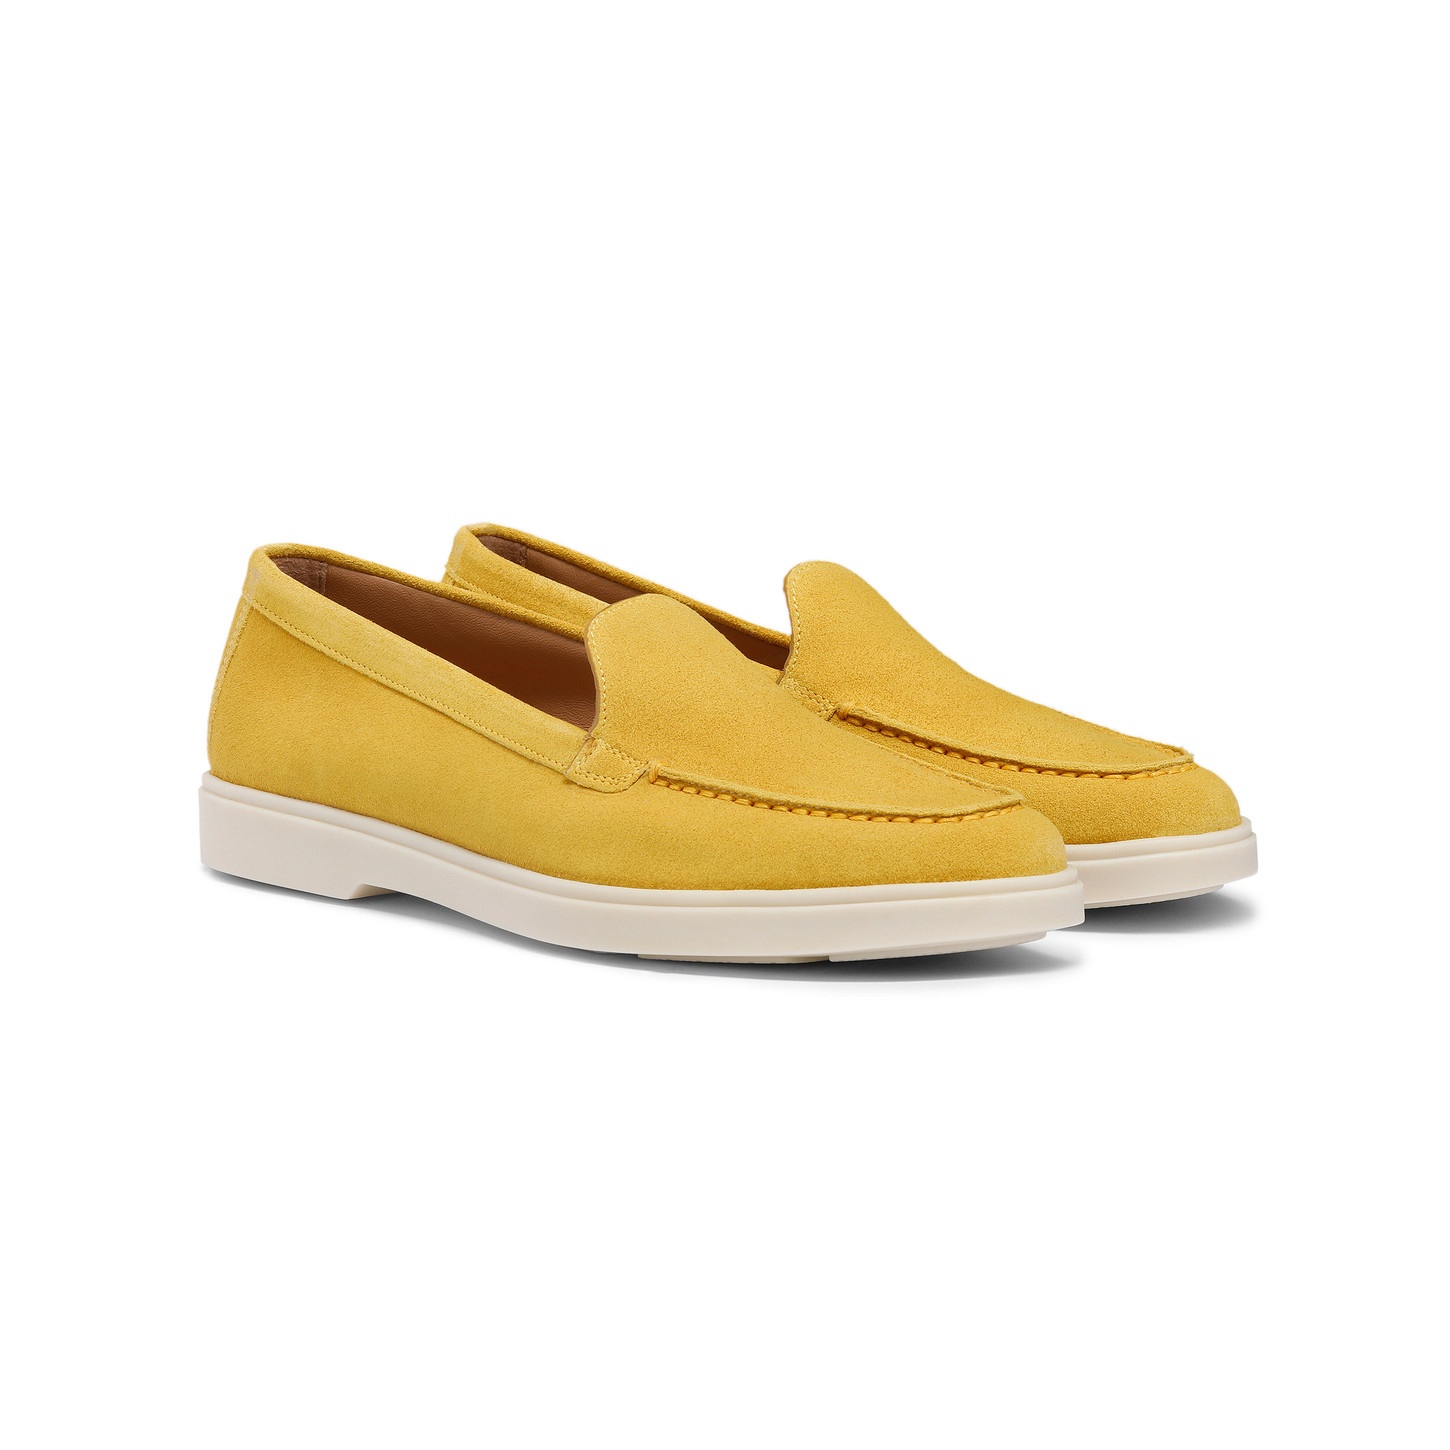 Women's yellow suede loafer - 3